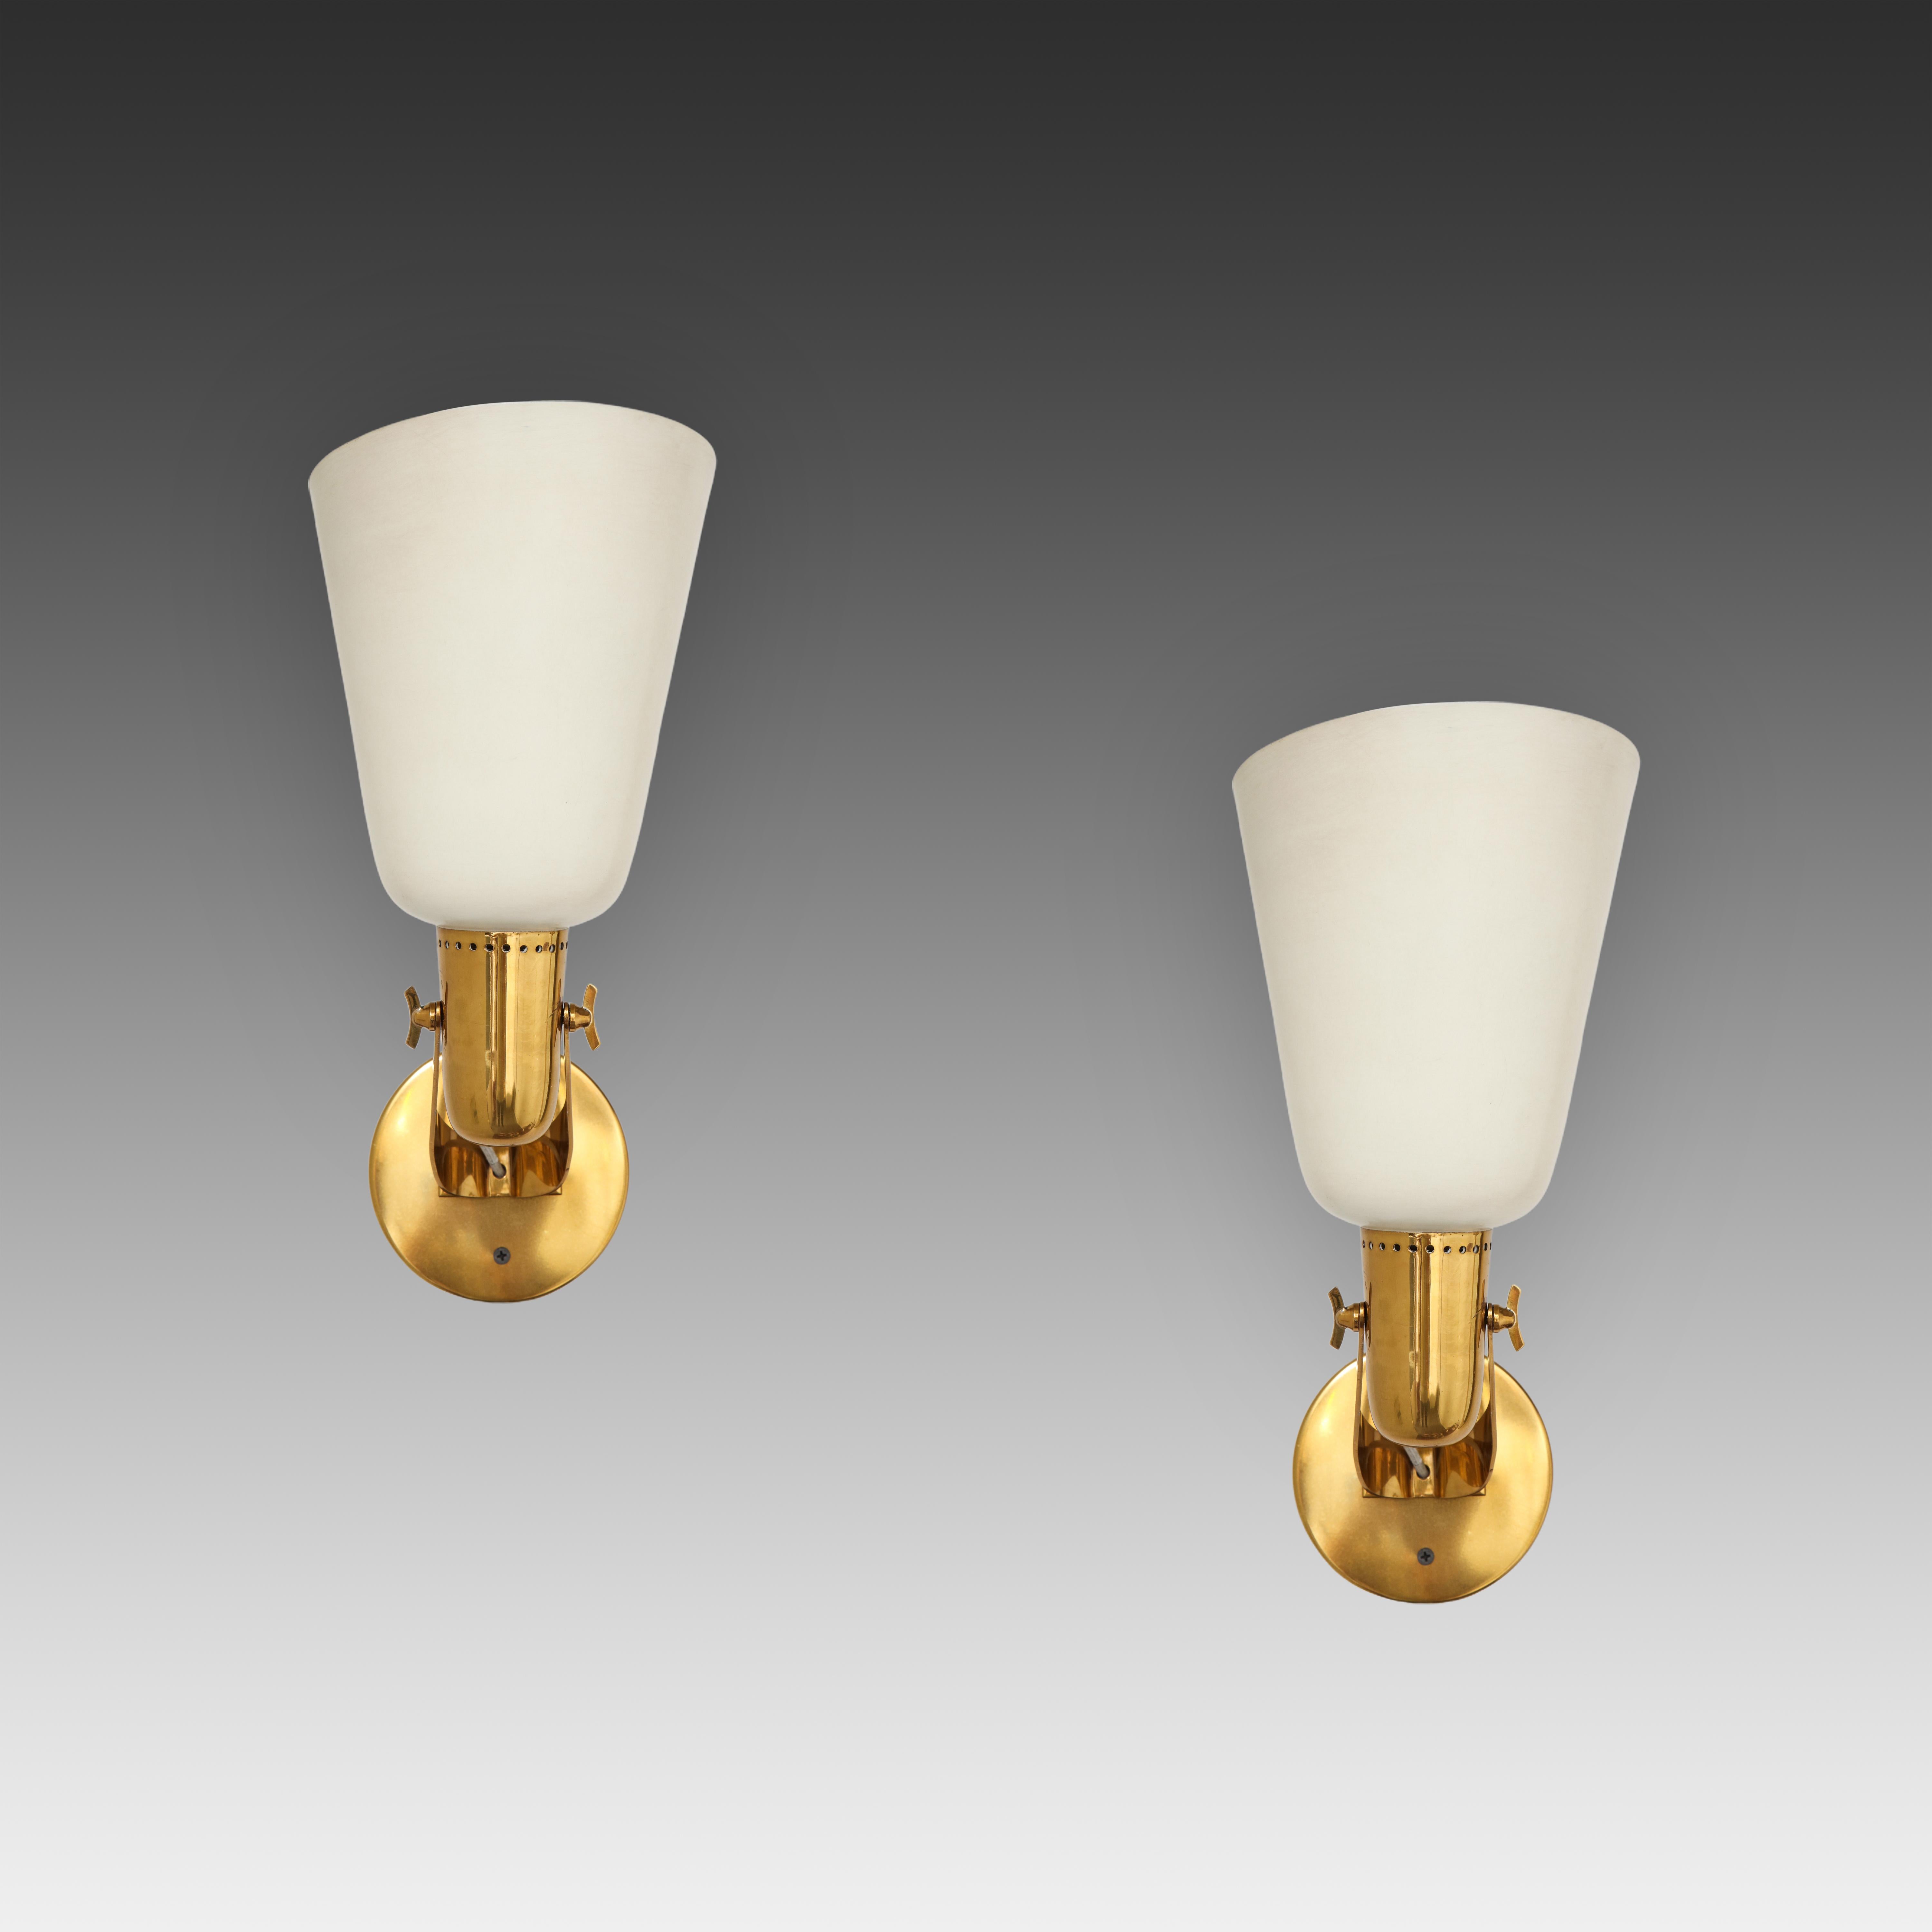 Gino Sarfatti for Arteluce model 121 rare large pair of sconces with cream lacquered metal shades on brass structures, Italy, 1940s. These sconces are an elegant design with adjustable shades or reflectors that pivot with butterfly wing nuts. In